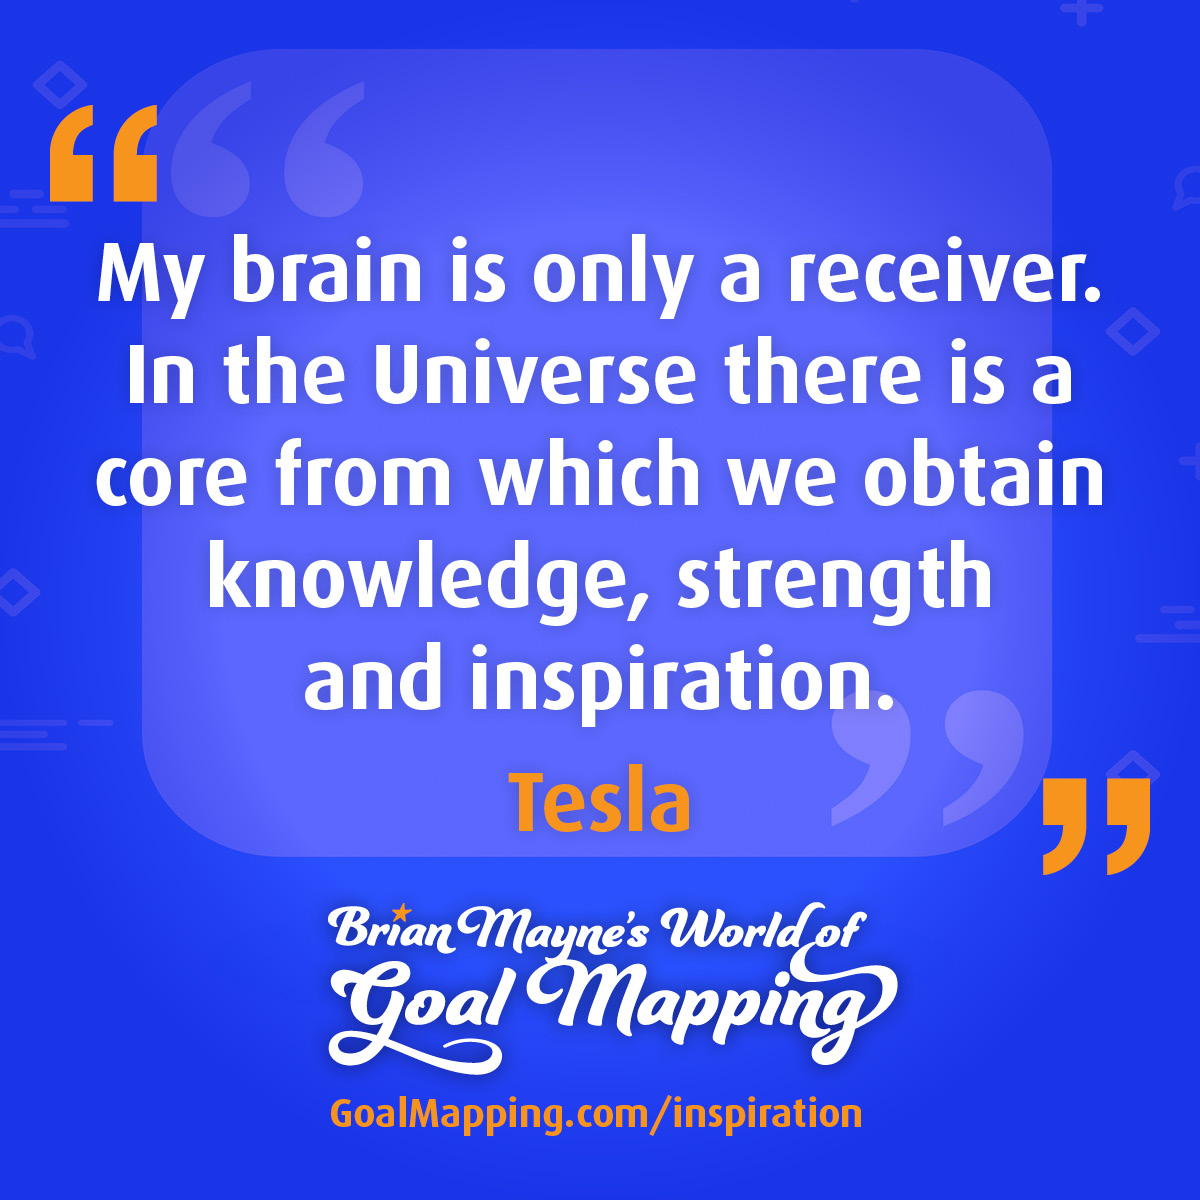 "My brain is only a receiver. In the Universe there is a core from which we obtain knowledge, strength and inspiration." Tesla